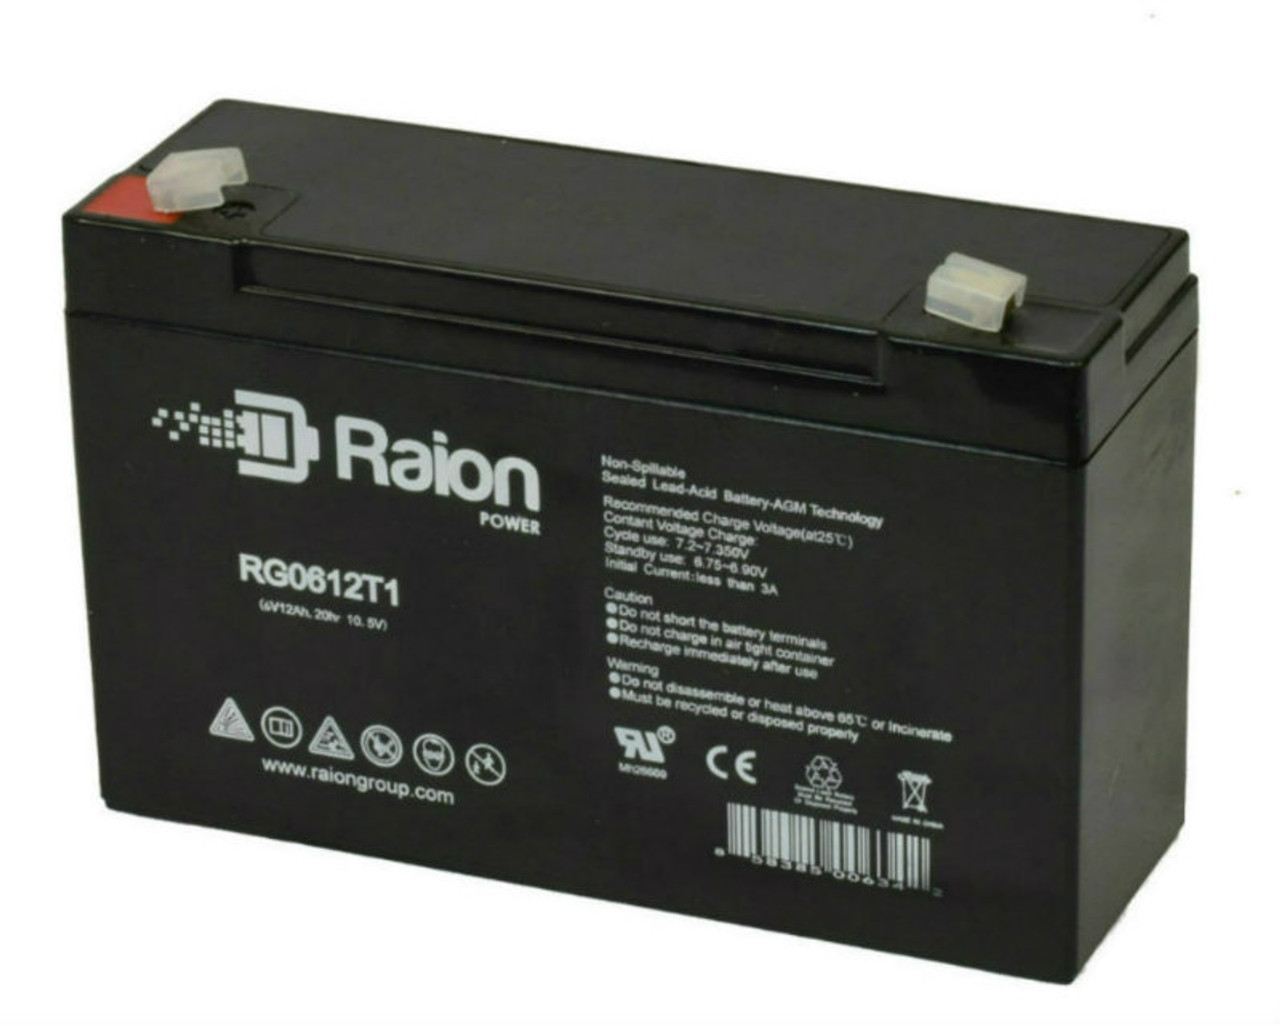 Raion Power RG06120T1 6V 12Ah Replacement UPS Battery Cartridge for Safe SM800